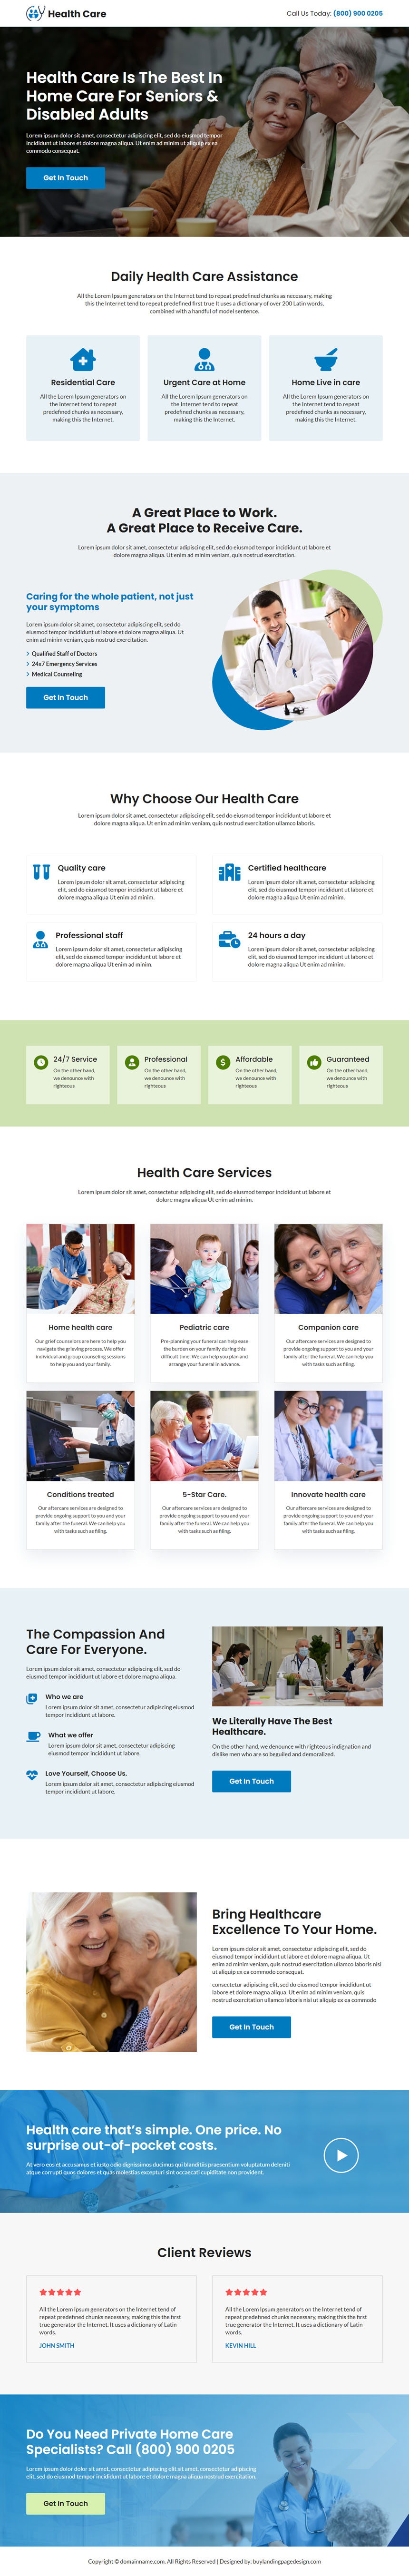 health care service for seniors and disabled lead capture landing page